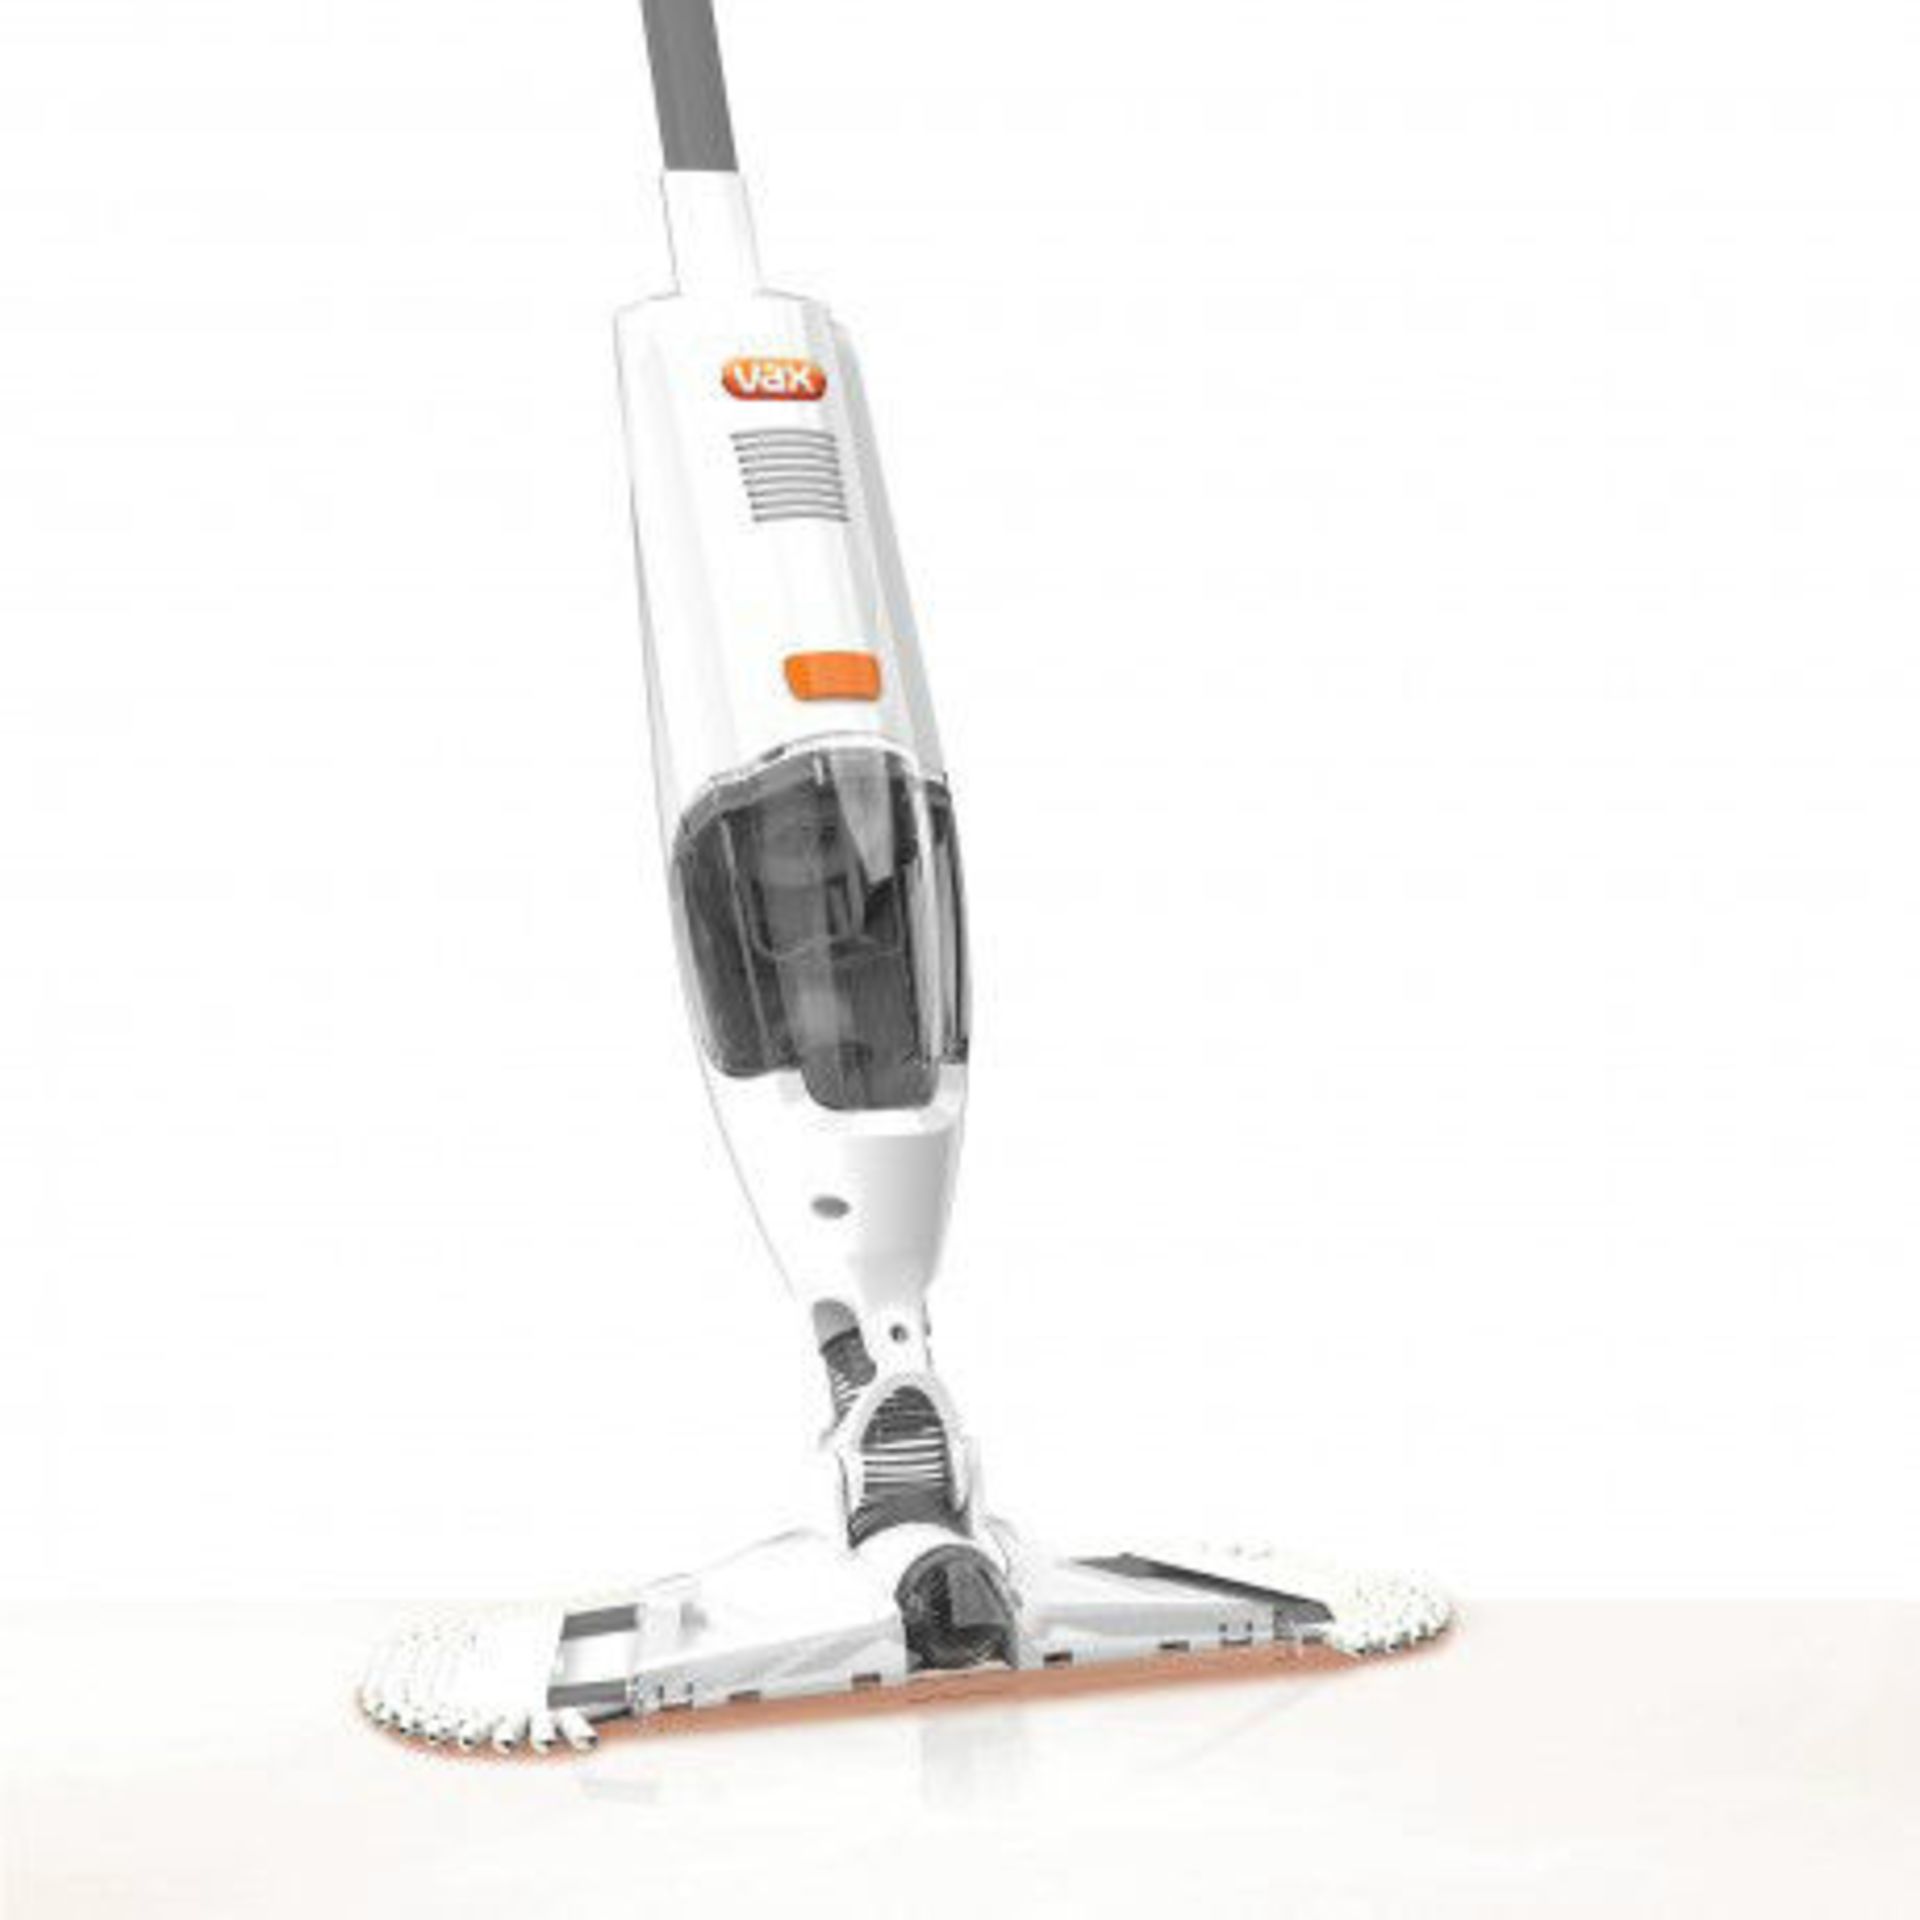 Brand New complete with Full VAX Guarantee 


The Vax Dust & Vac Corded Hard Floor Cleaner is - Image 3 of 5